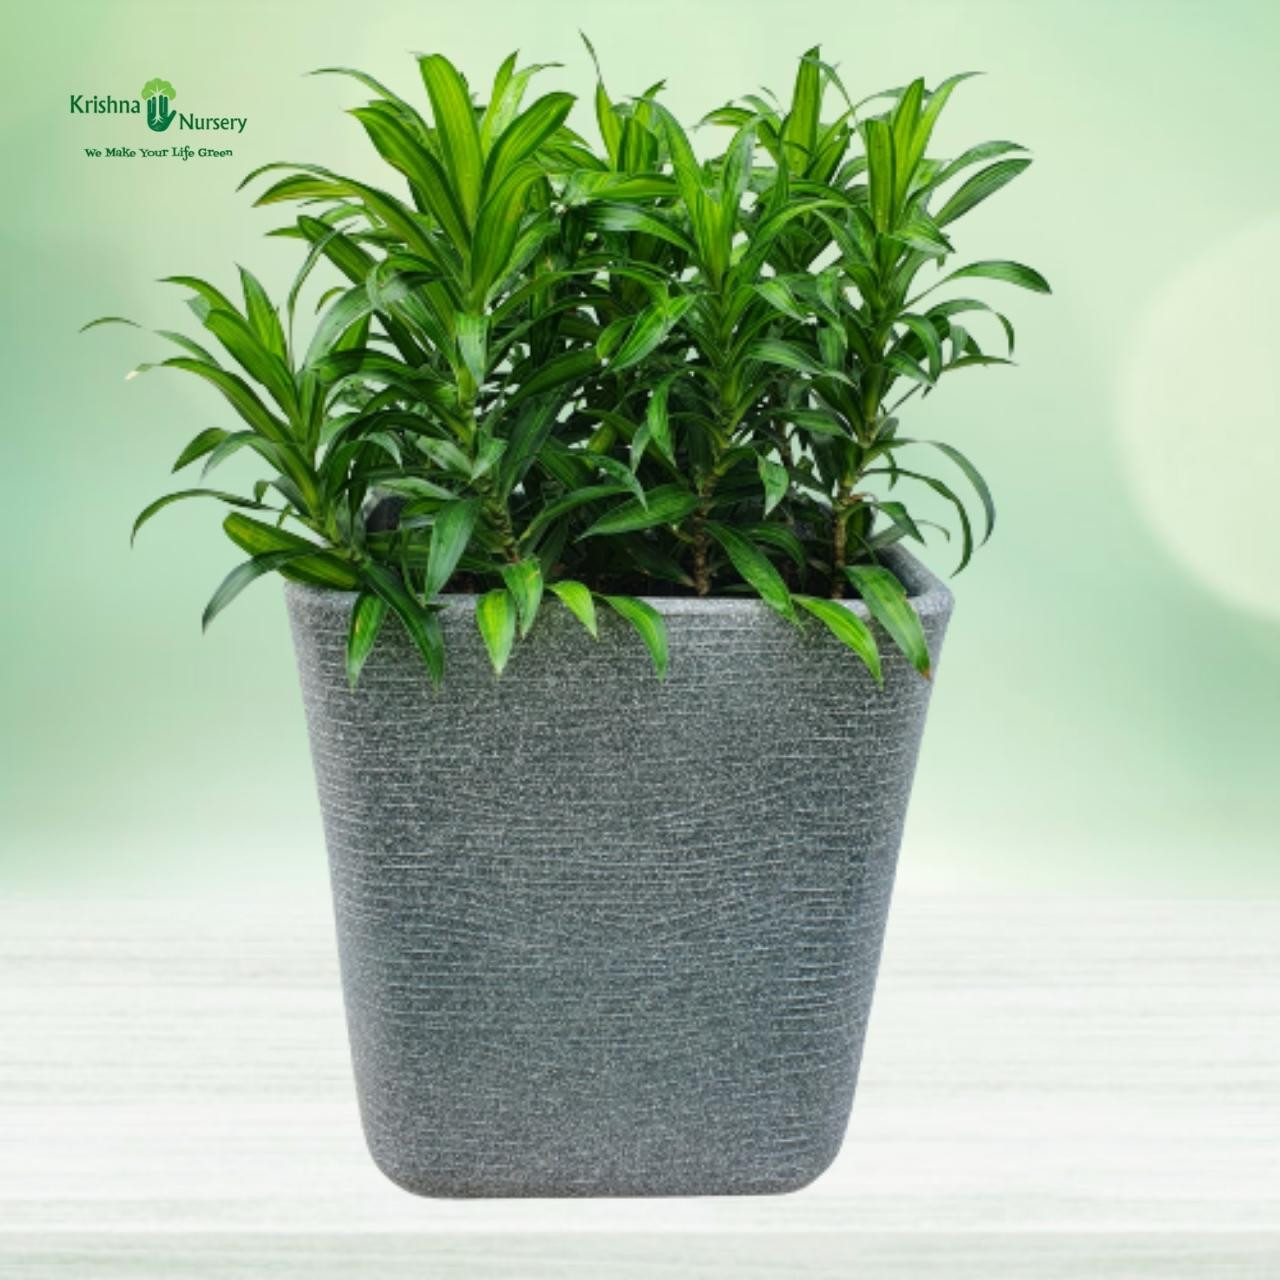 Green Song of India with Designer Pot - Premium Products -  - green-song-of-india-with-designer-pot -   